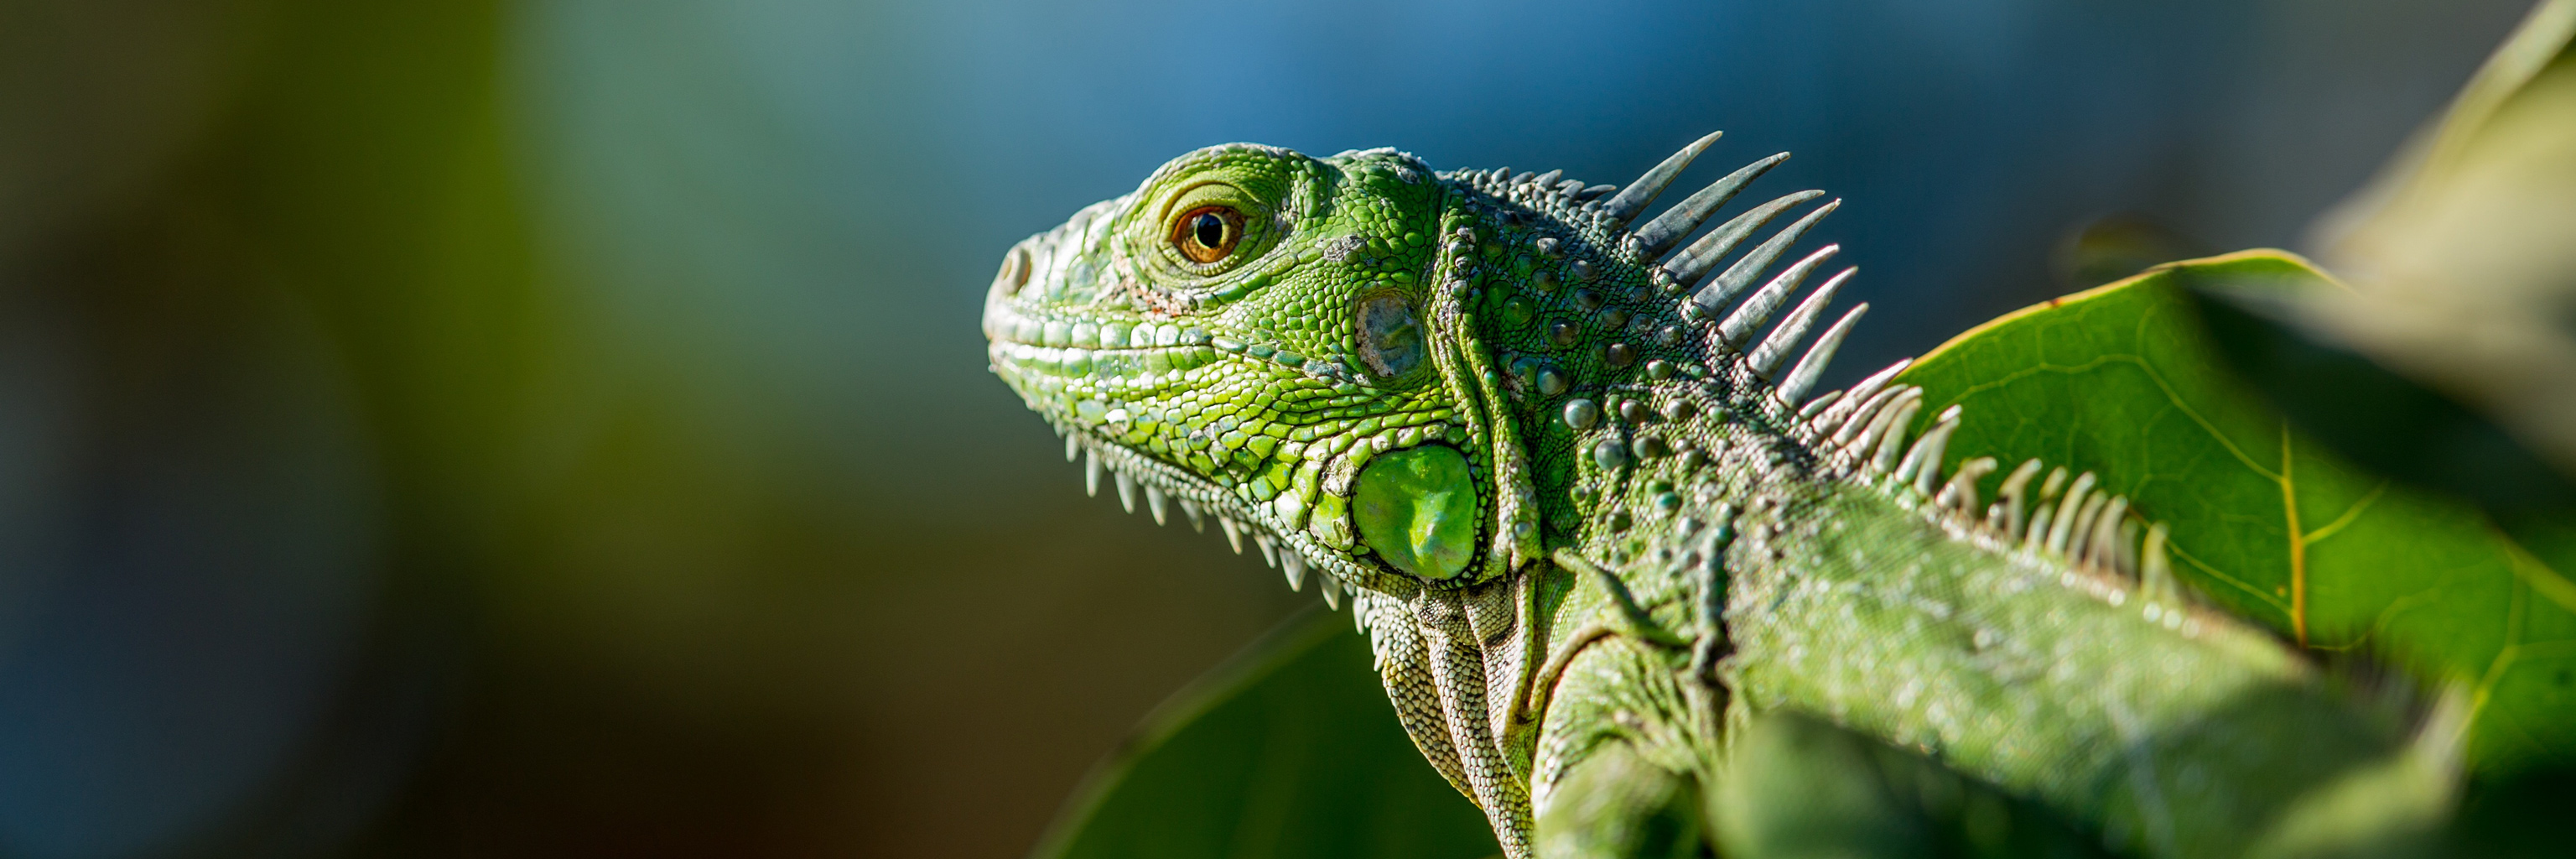 A green iguana looking to the left